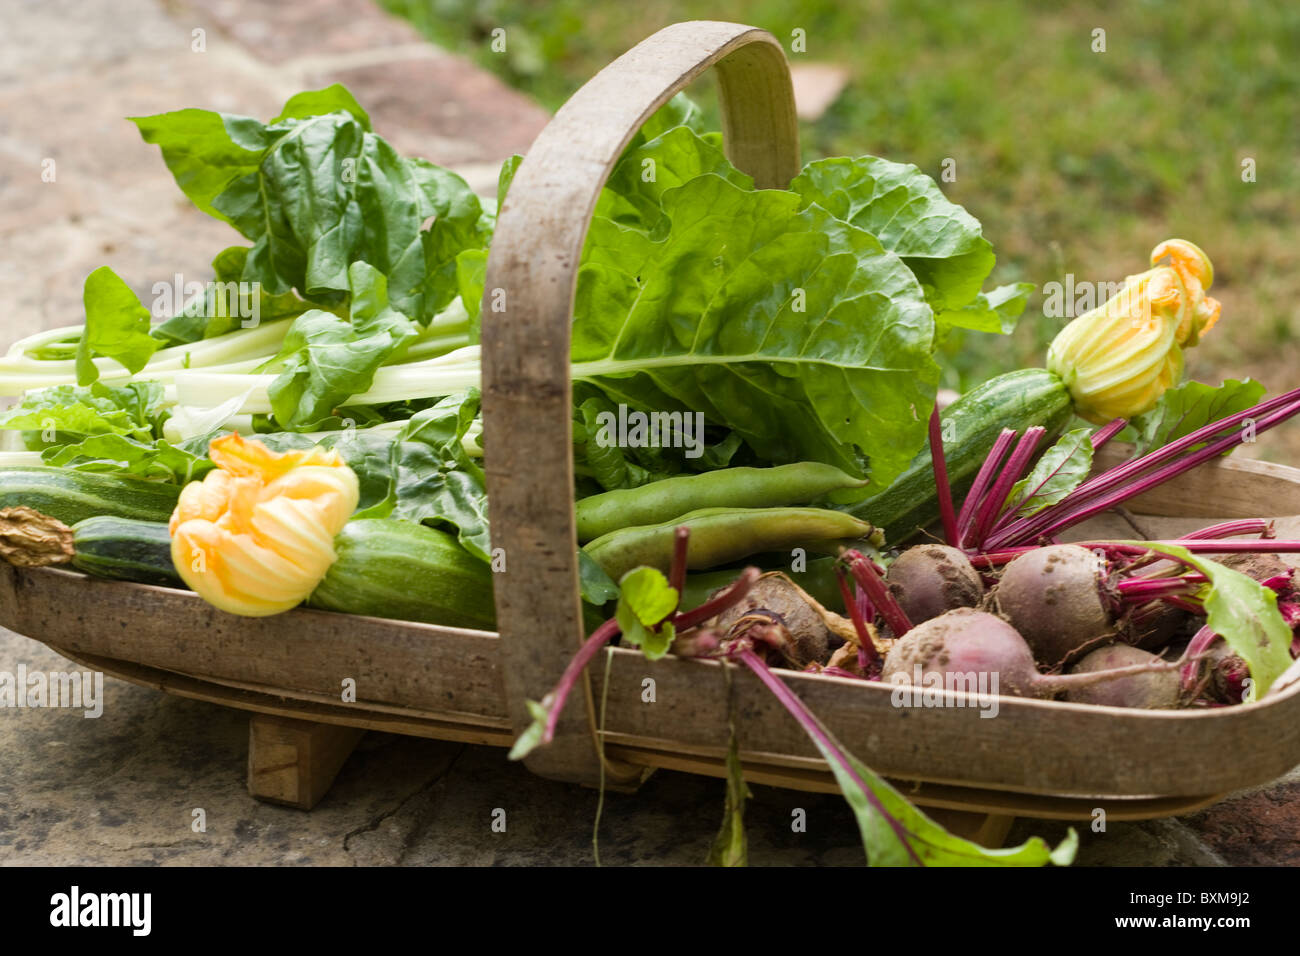 Trug of fresh produce, courgettes, beetroot, spinach, chard and broad beans Stock Photo